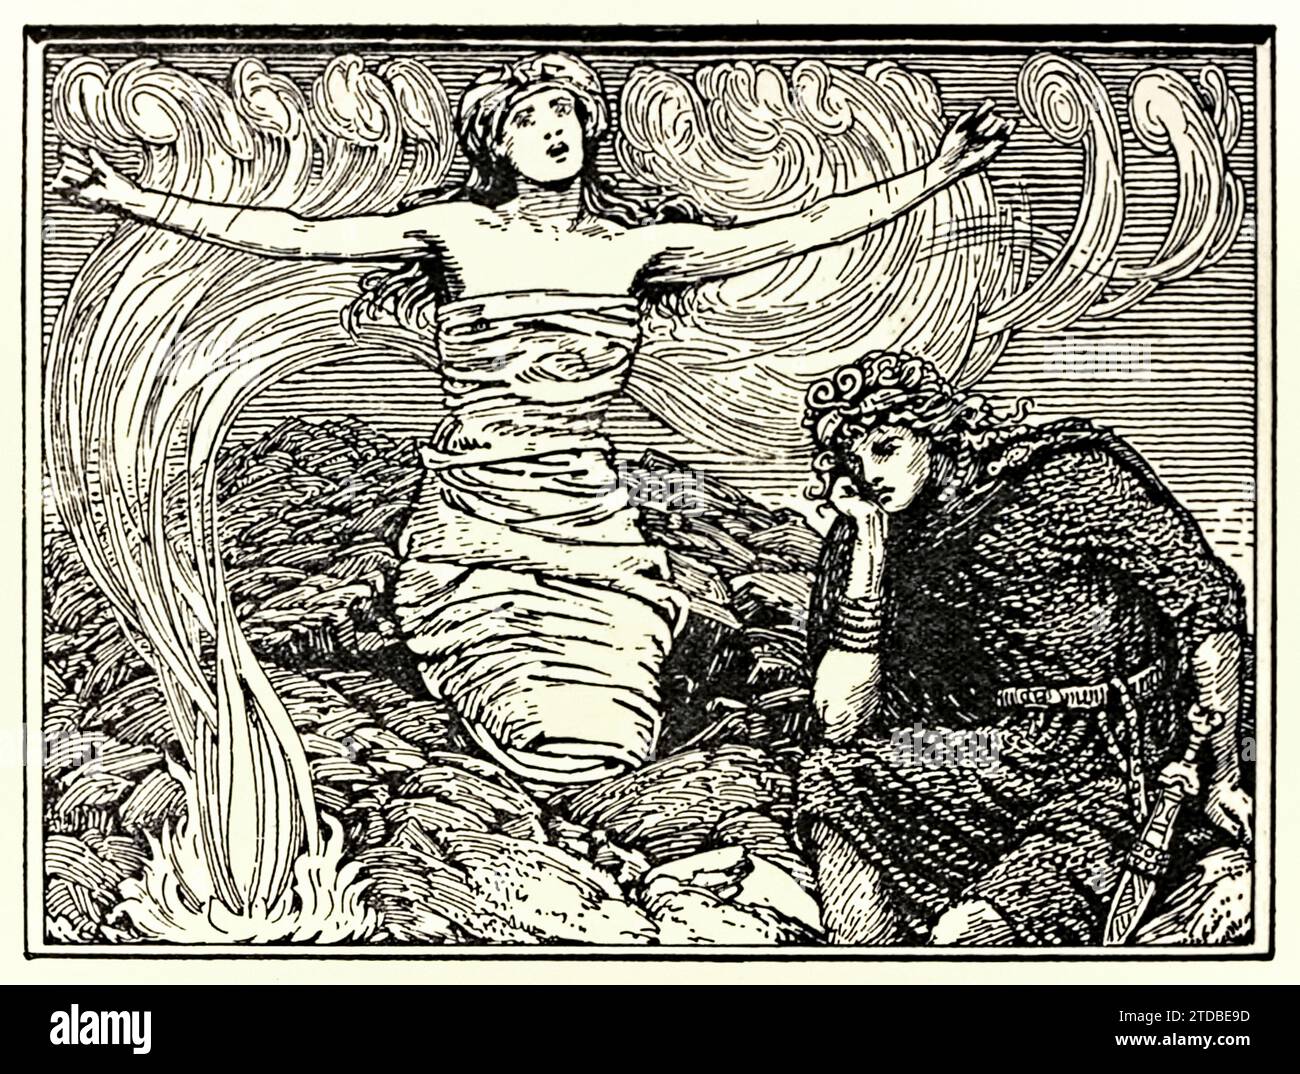 ‘Groa’s Incantation’ from the ‘Poetic Edda’ a collection of traditional Old Norse poems translated by Olive Bray (1878-1909) first published in 1908. Illustration by W. G. Collingwood (1854-1932) showing Gróa, a seeress in Norse Mythology, helping her son Svipdagr from beyond the grave in a scene from the poem Grógaldr. Stock Photo